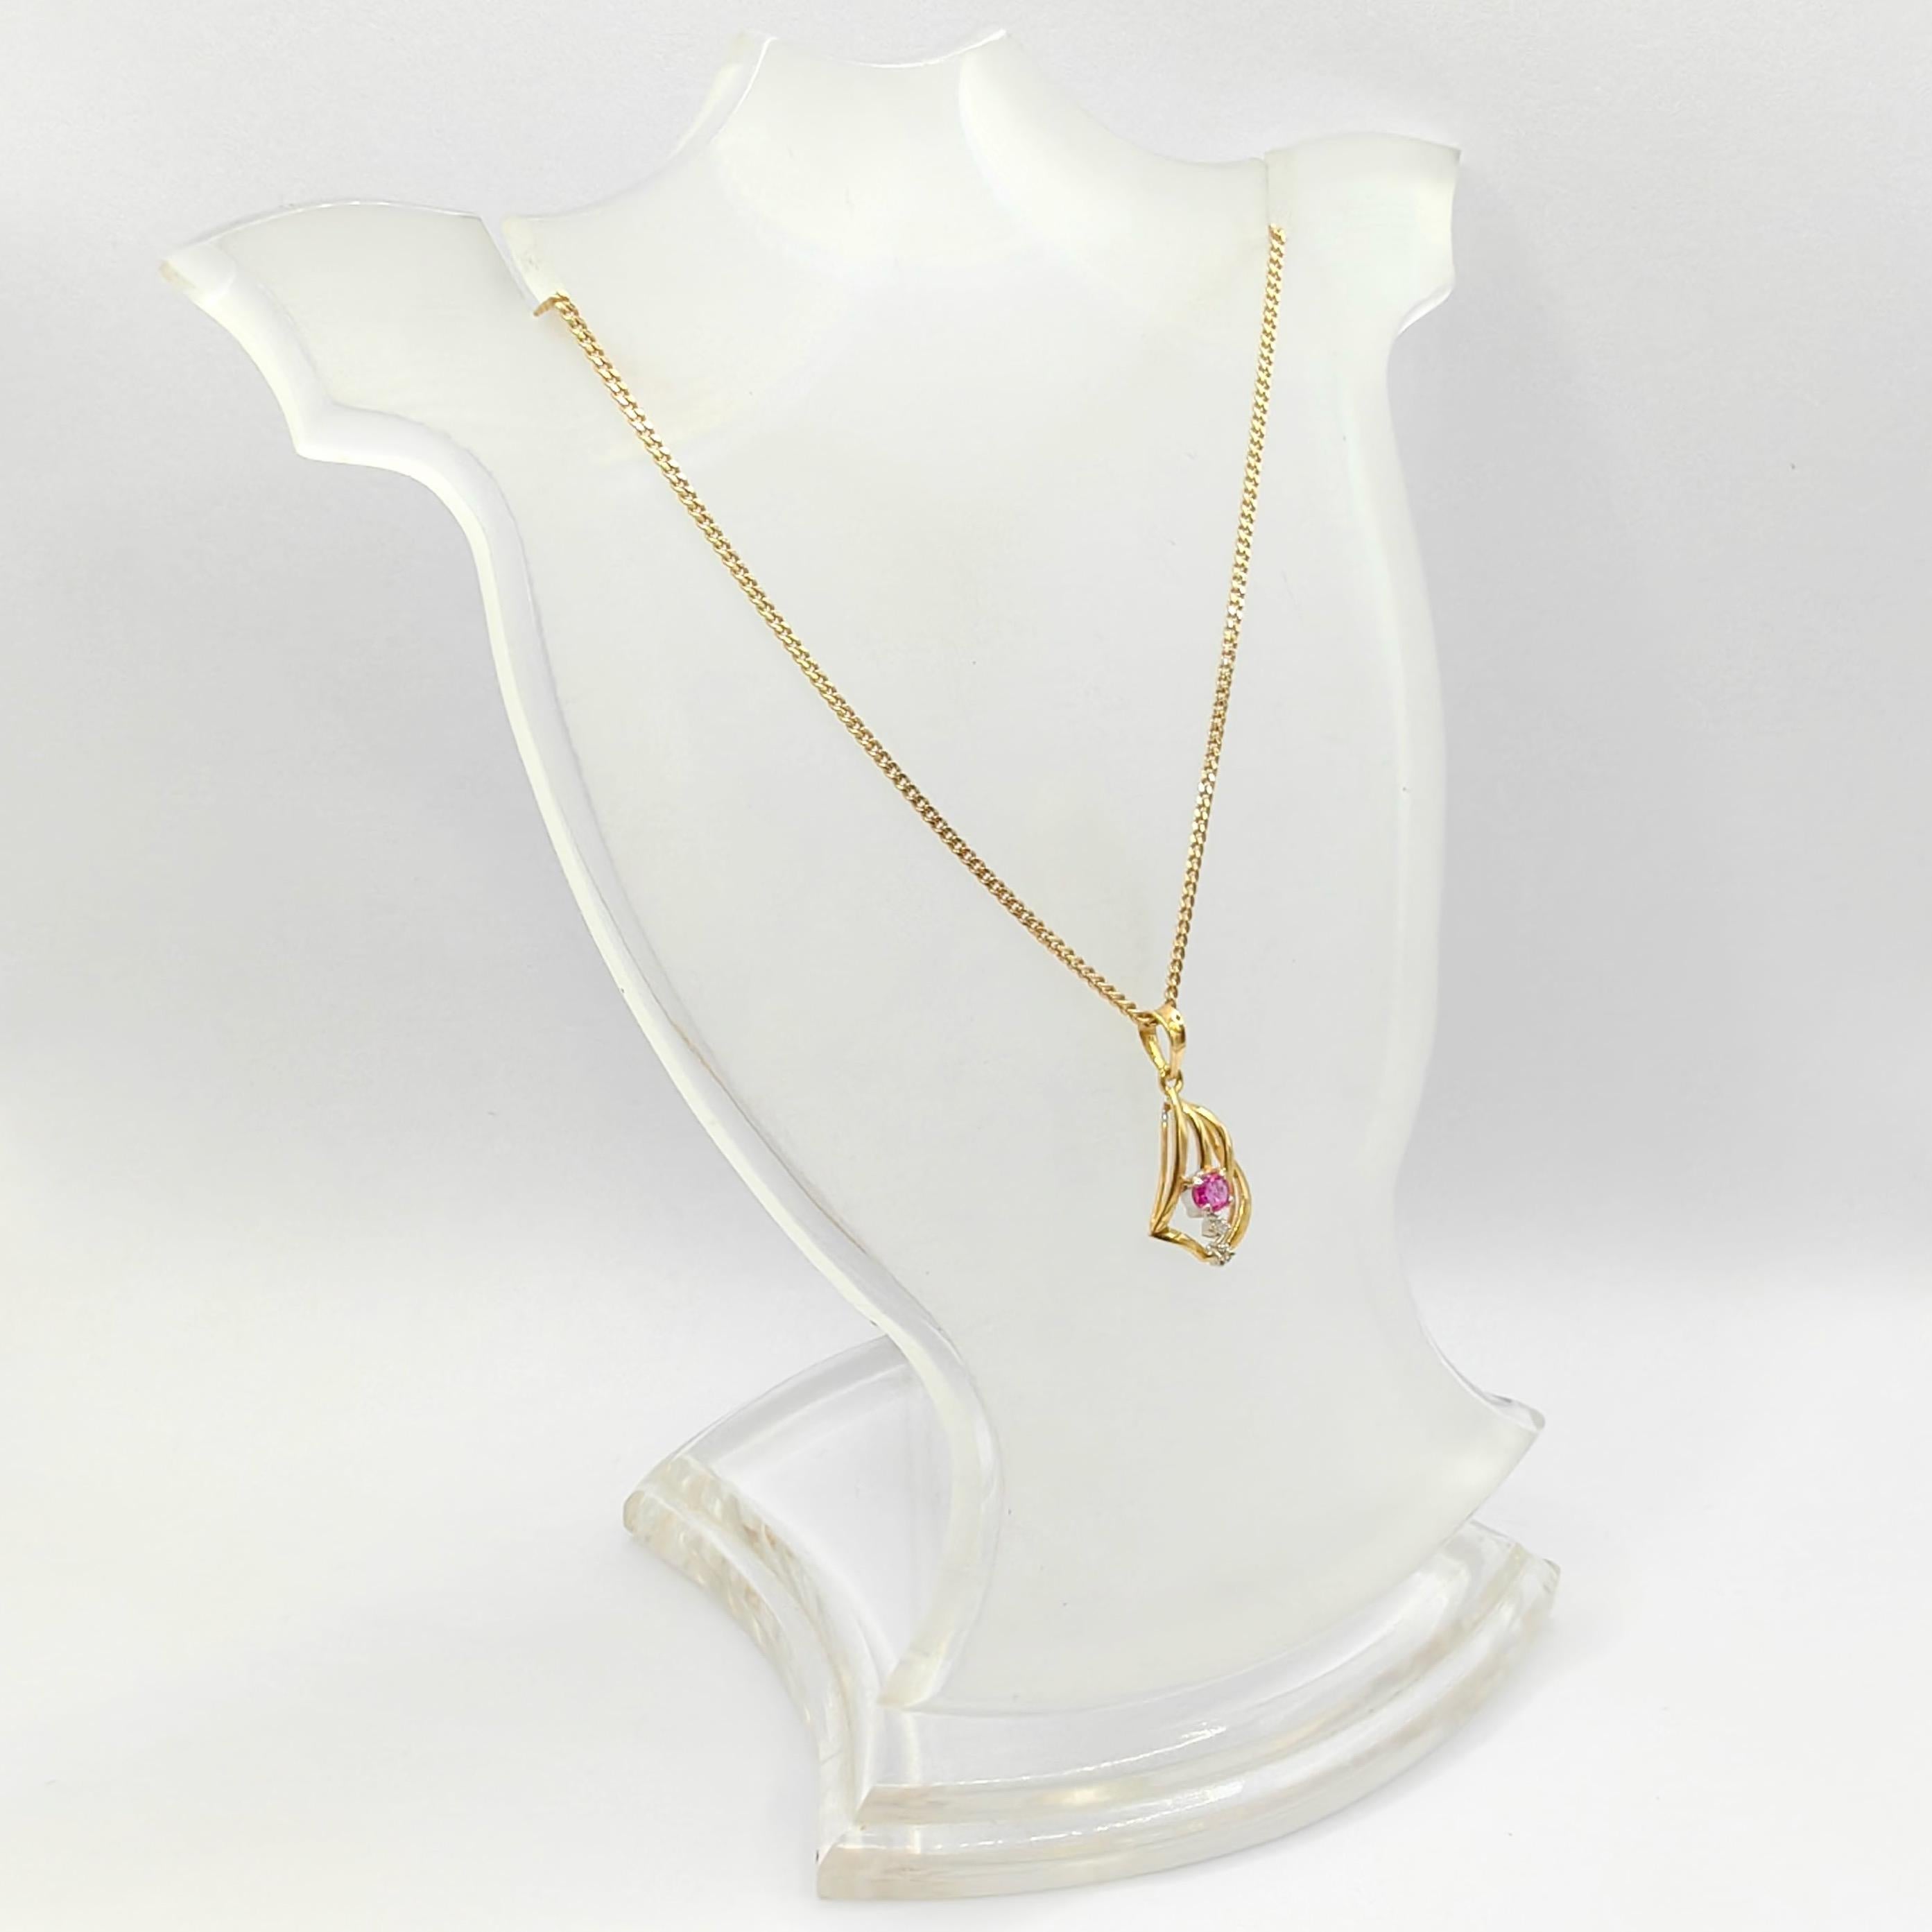 Vintage Natural Pink Sapphire Diamond Necklace Pendant in 14K Yellow Gold 2